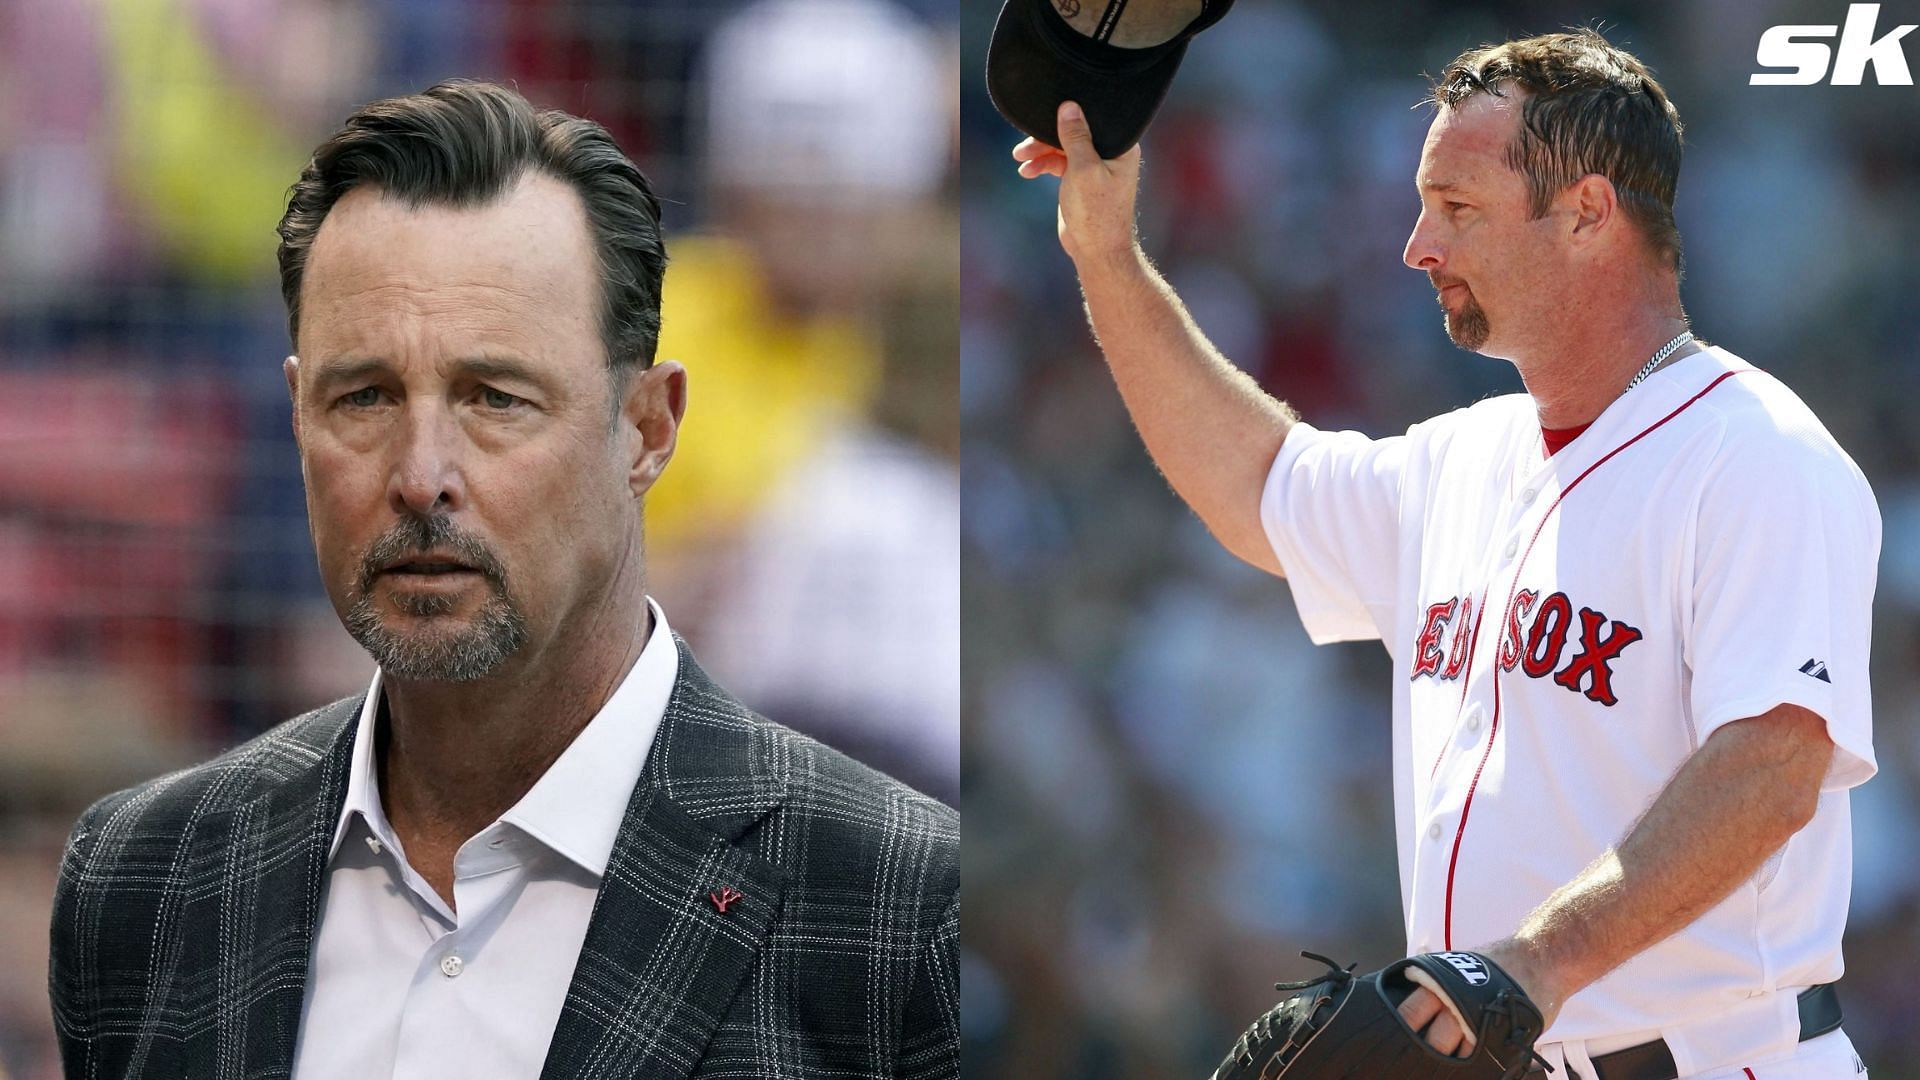 Red Sox veteran Tim Wakefield is survived by his wife Stacy and two children